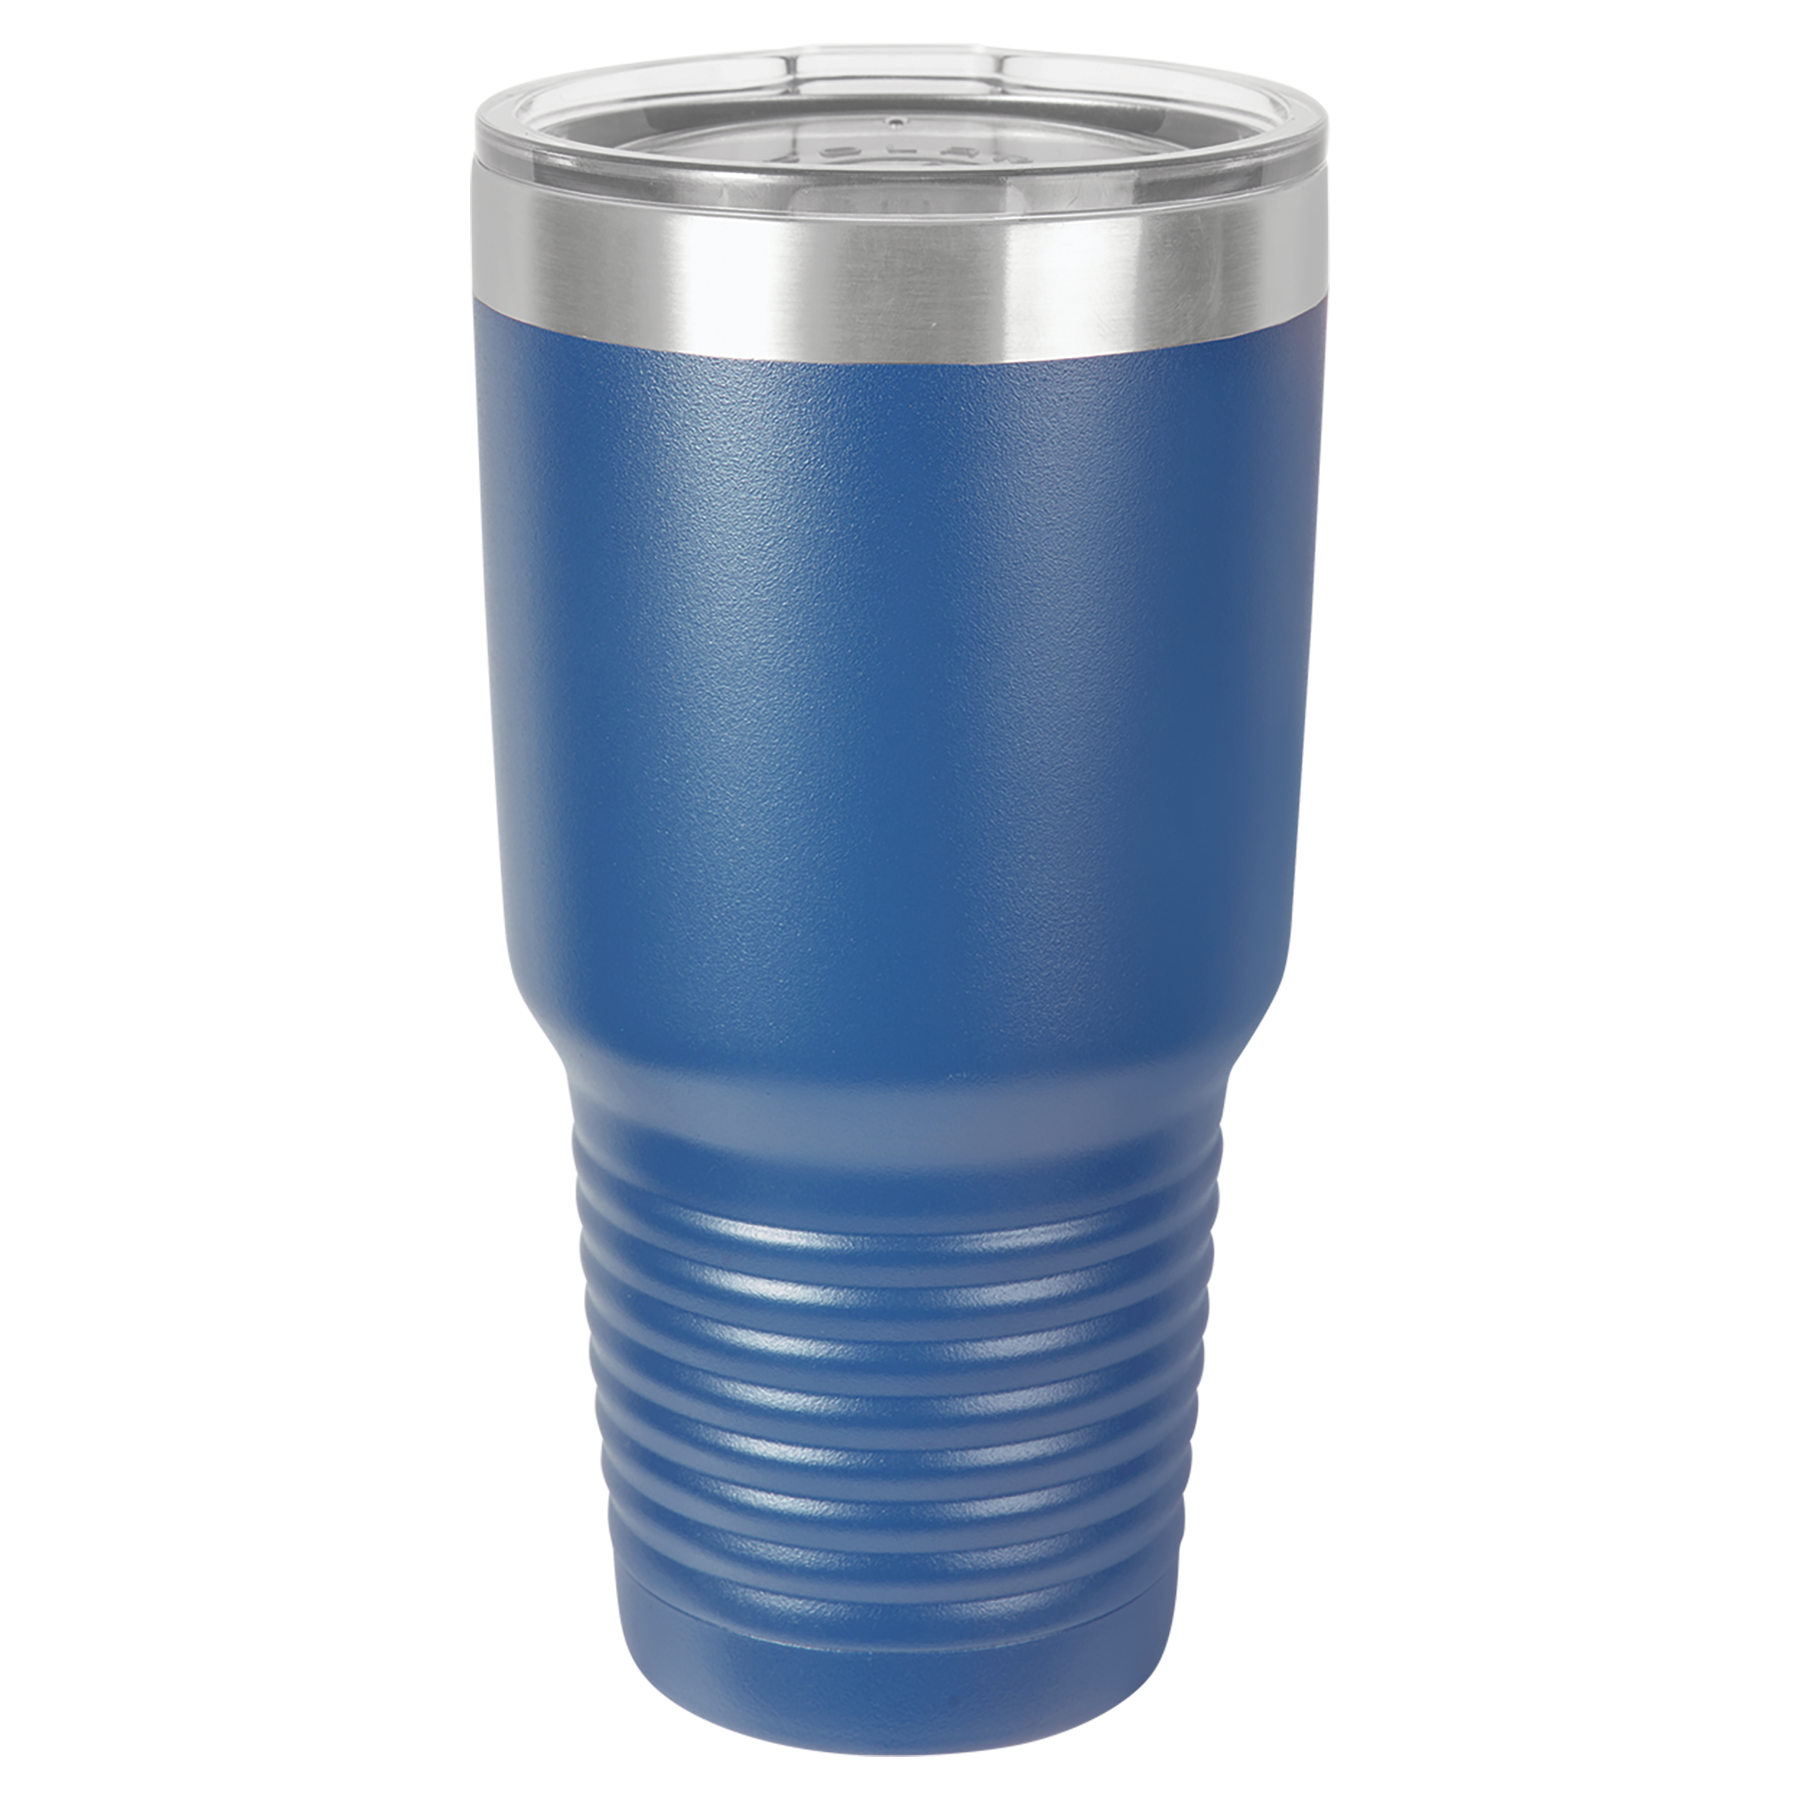 Royal Blue 30oz Tumbler -One Free Engraving -Fits most Cup Holders -Double-wall Vacuum Insulated -Made from 18/8 Gauge Stainless Steel (Type 304 Food Grade) -Lid is BPA Free (Hand Wash Only) -Dishwasher Safe -Works with Cold and Hot Drinks -19 Color Options -Perfect for Personalized Gifts, Awards, Incentives, Swag & Fundraisers